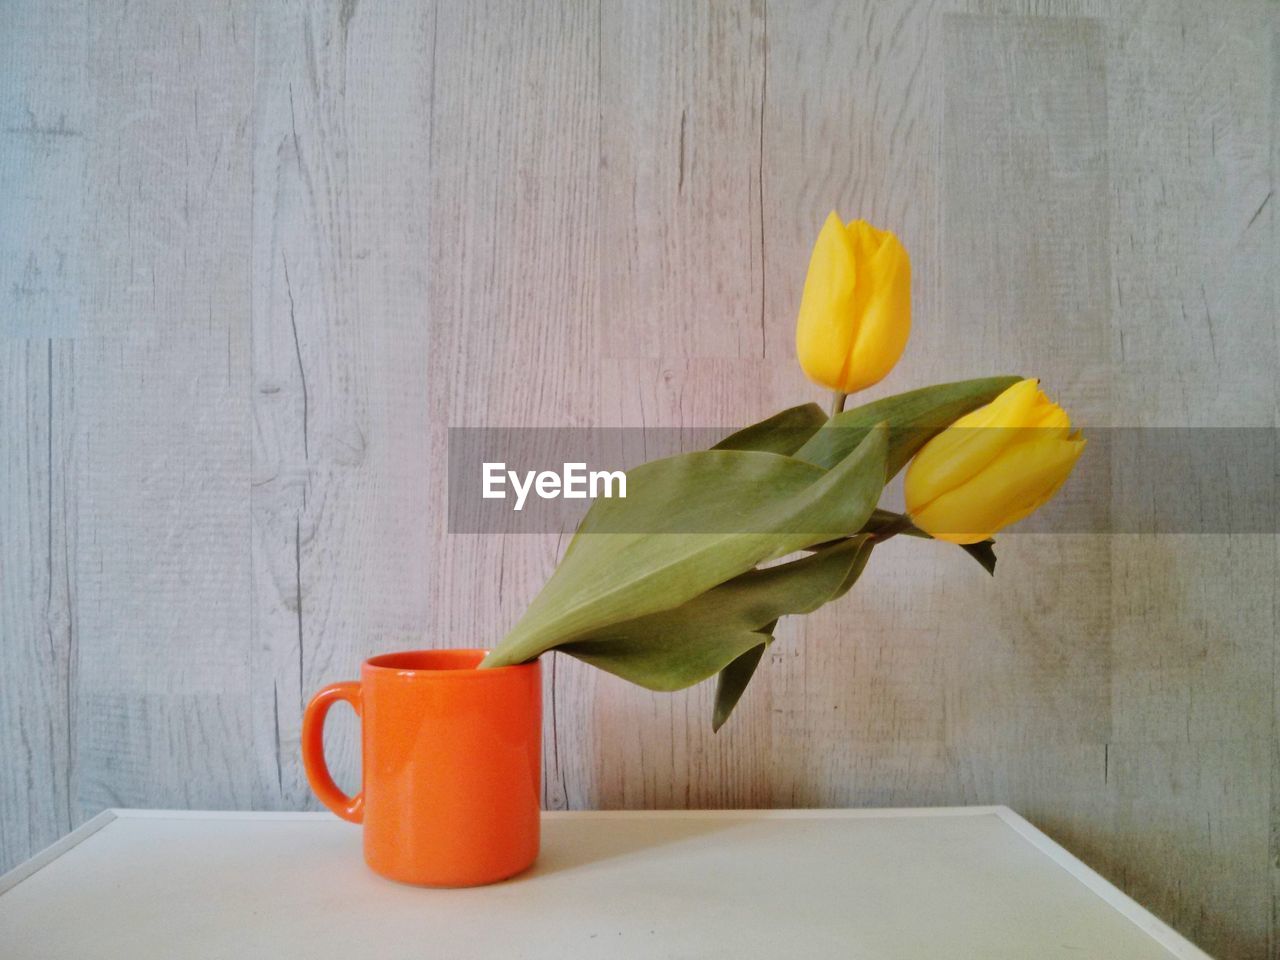 CLOSE-UP OF TULIP ON TABLE AGAINST RED WALL